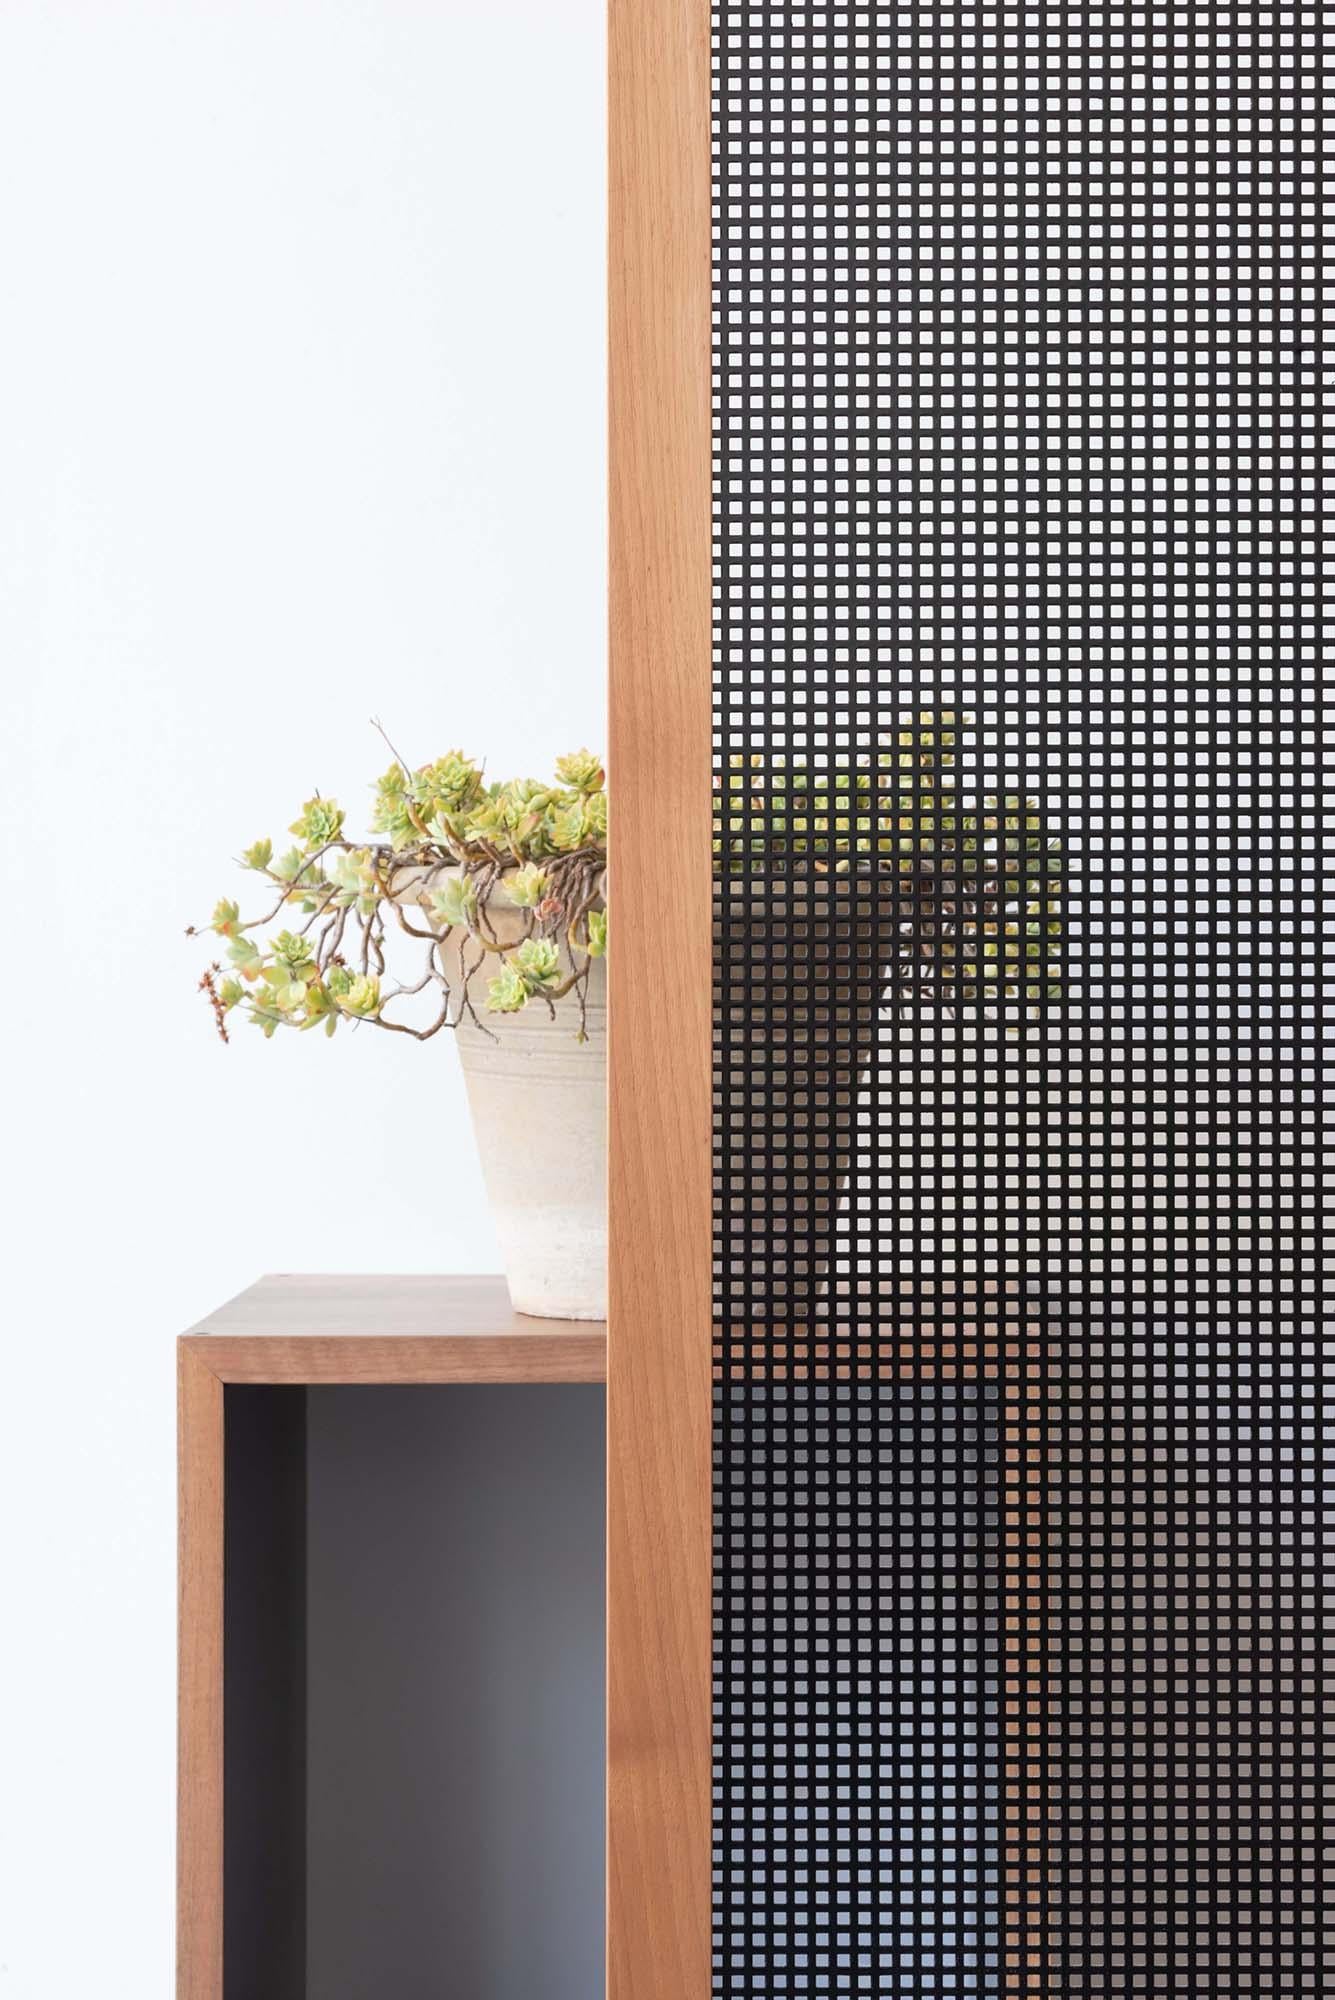 Four rectangular doors in walnut and perforated sheet shield spaces drawing light and dark suggestions.
Intuit, grasp the forms, which beyond the screen are defined in space.
A thin membrane in perforated iron, which hides and exalts, helping the